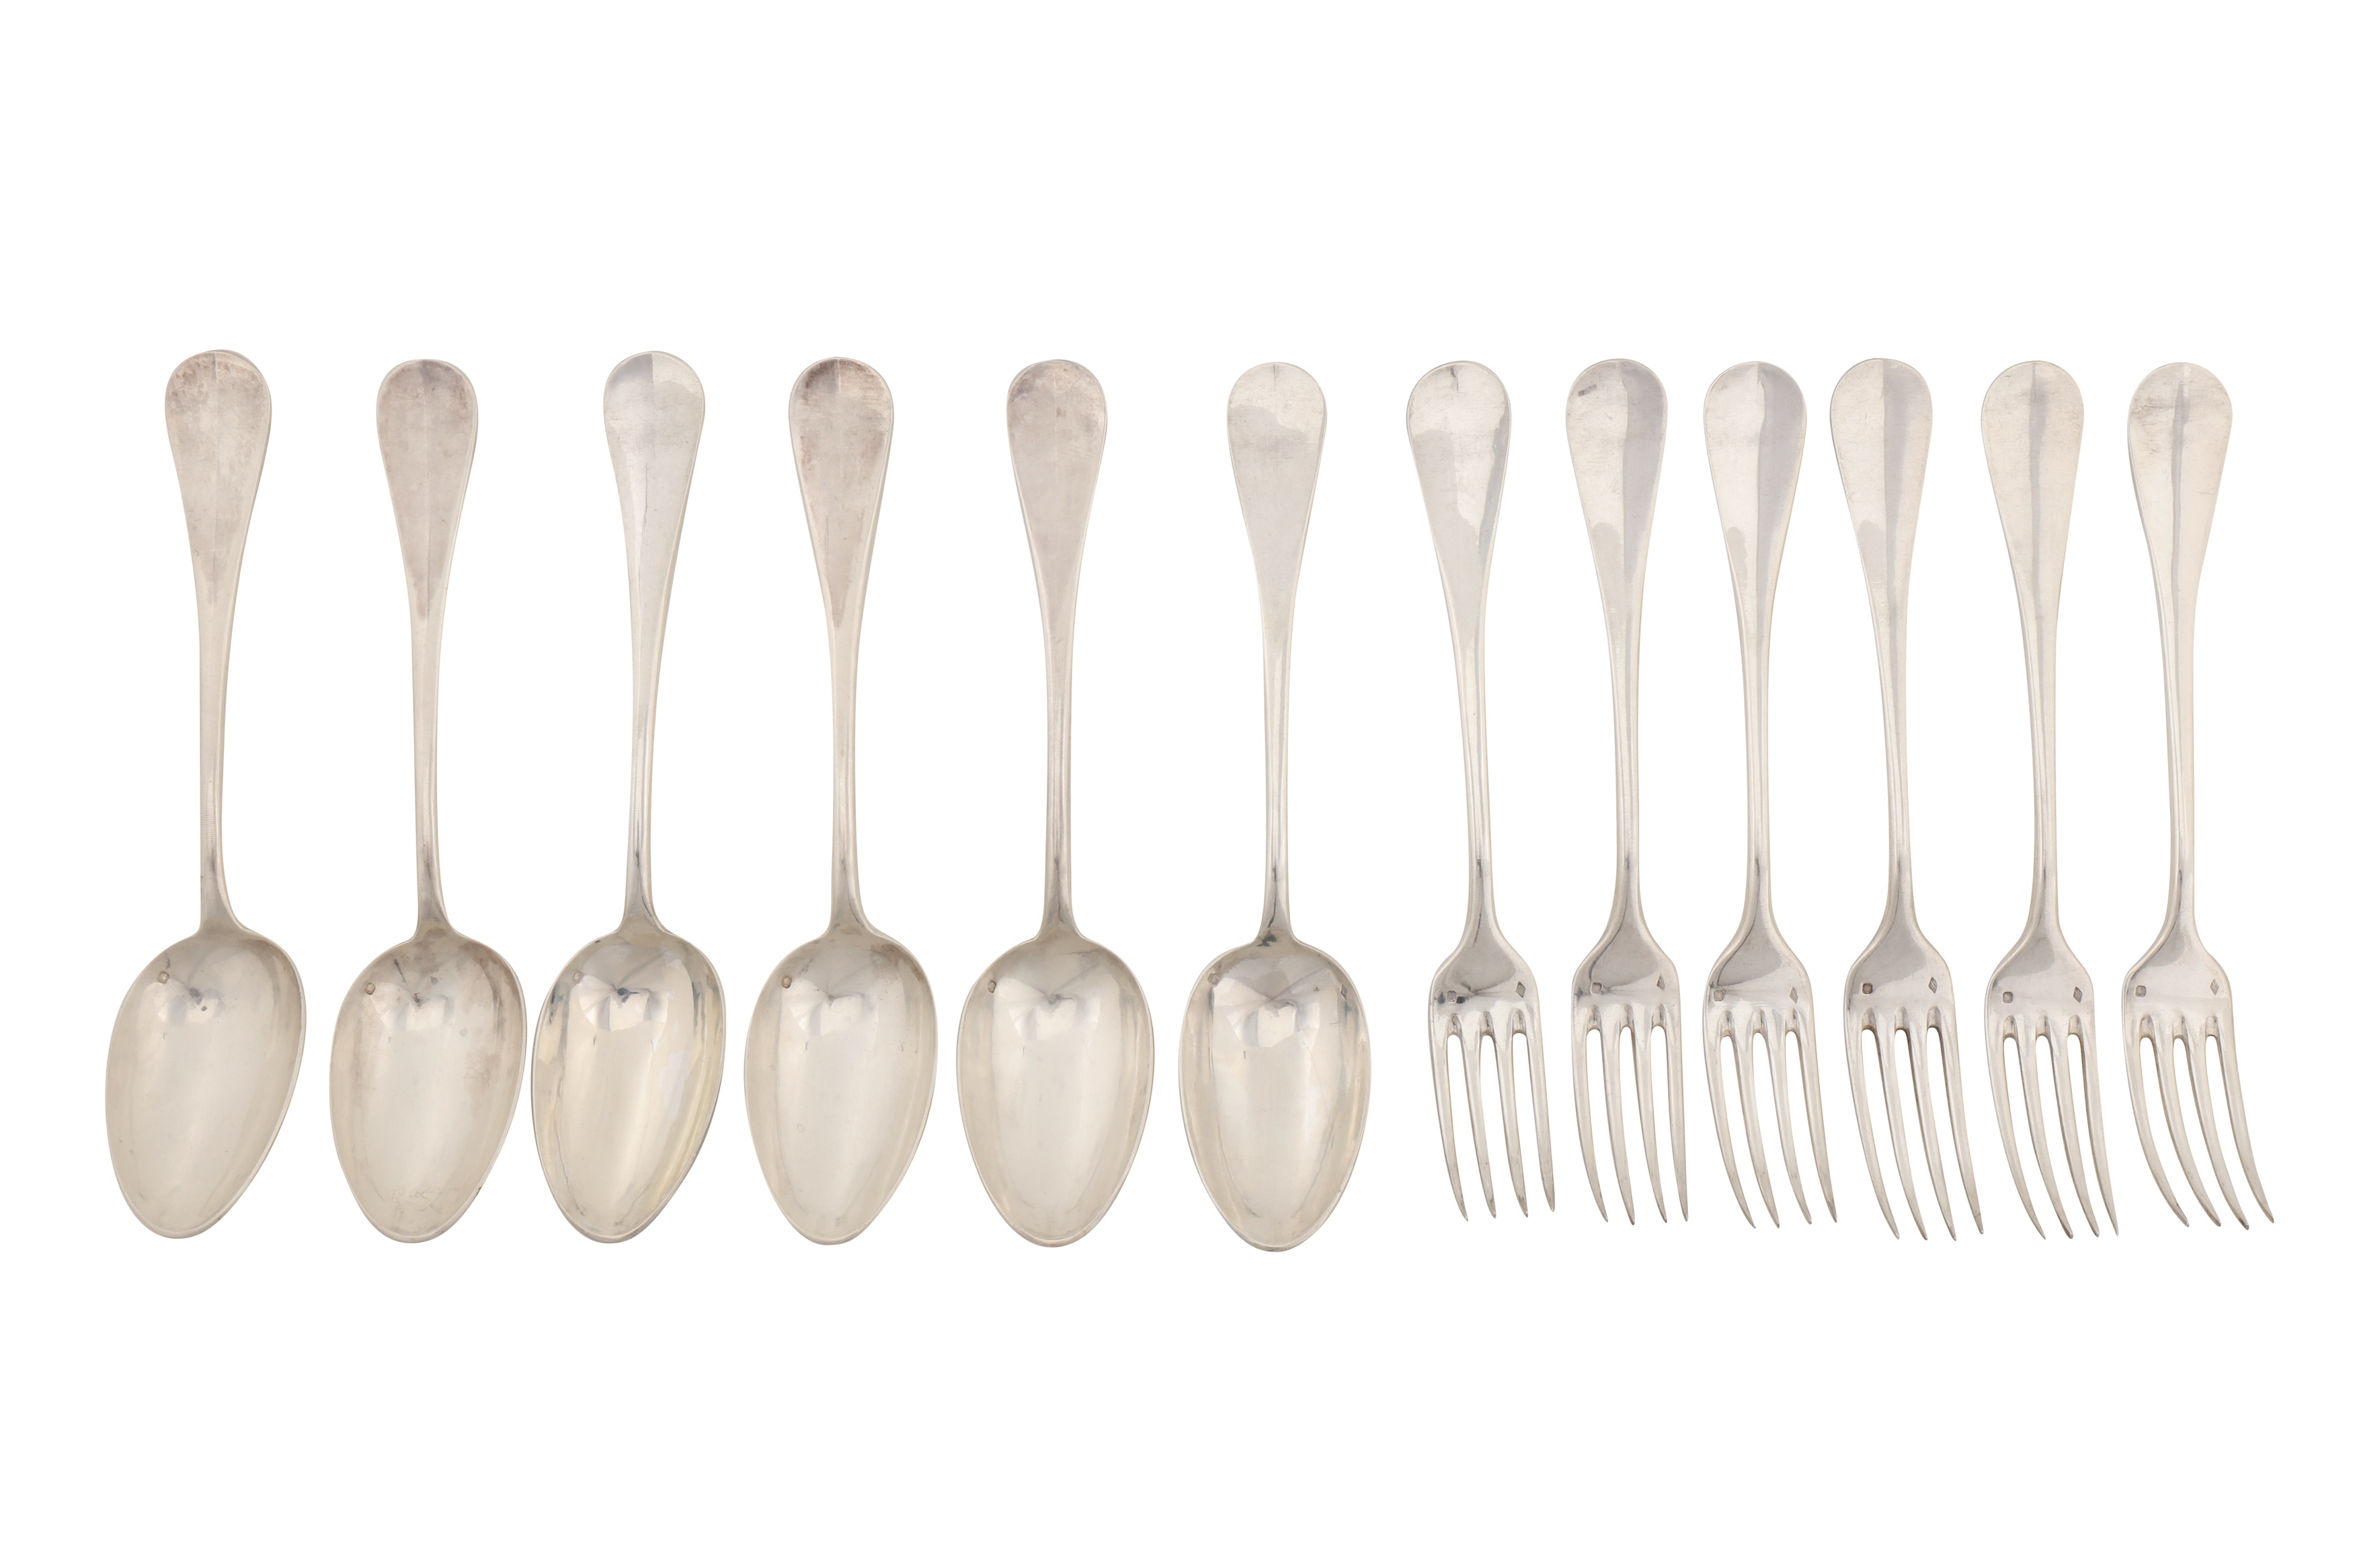 A set of late 19th century French 950 standard silver tablespoons and table forks, Paris circa 1880 